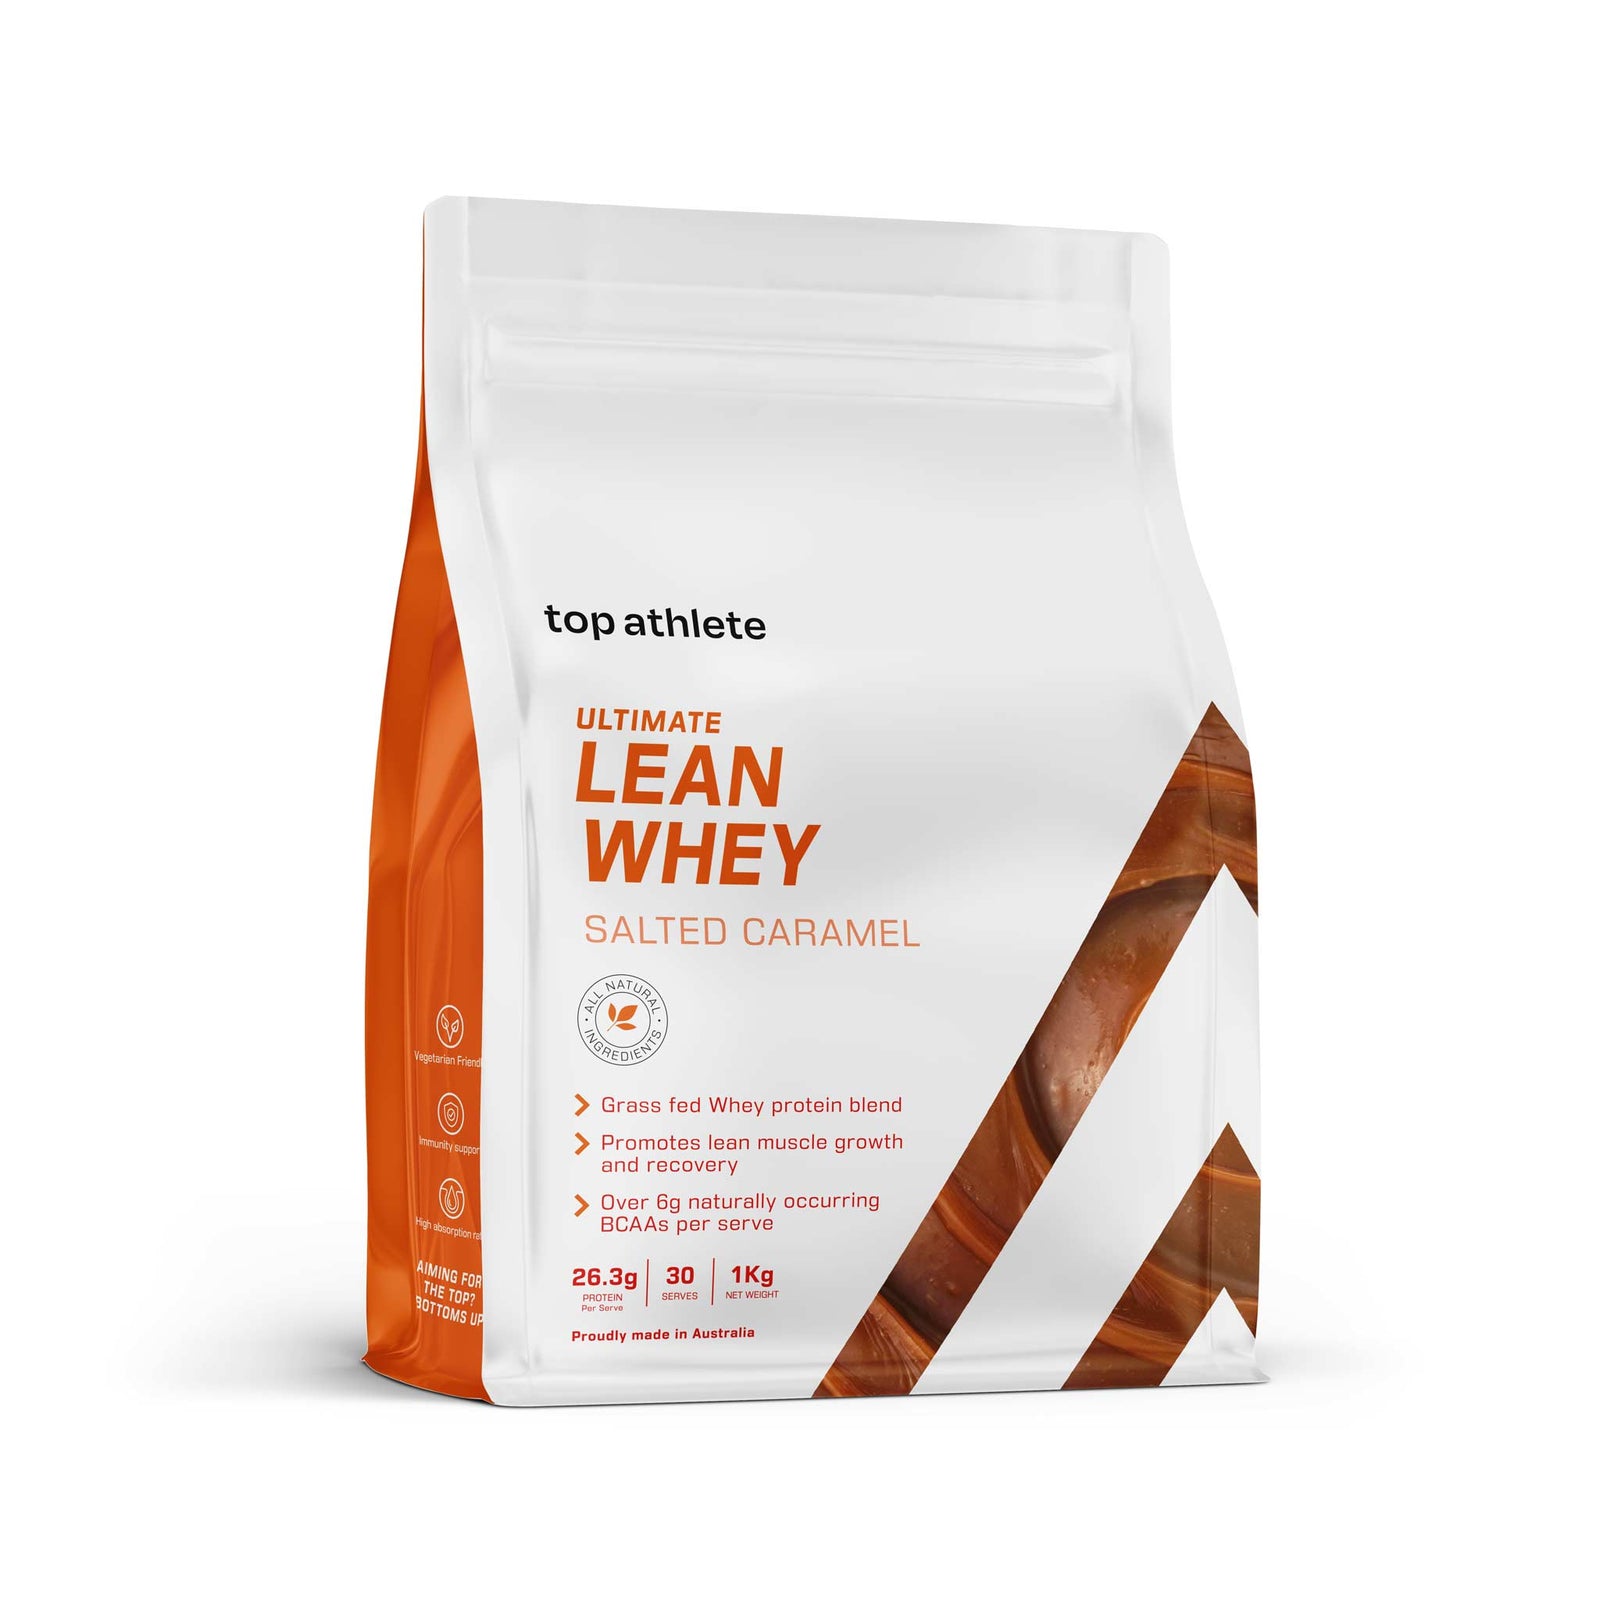 Ultimate Lean Whey Salted Caramel